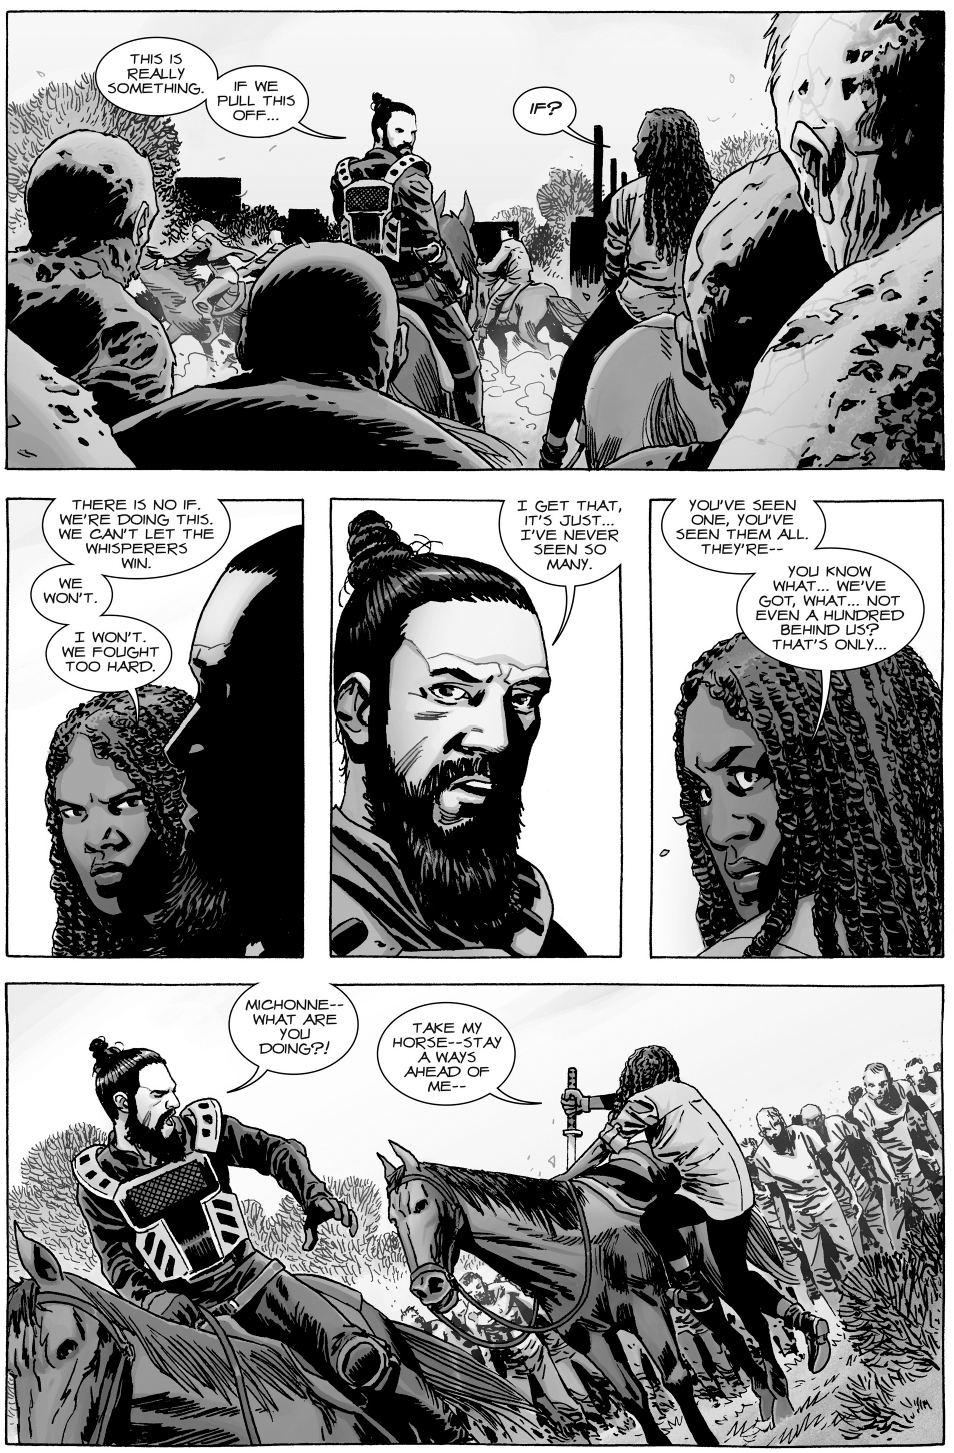 Michonne And Jesus VS The Whisperers Army